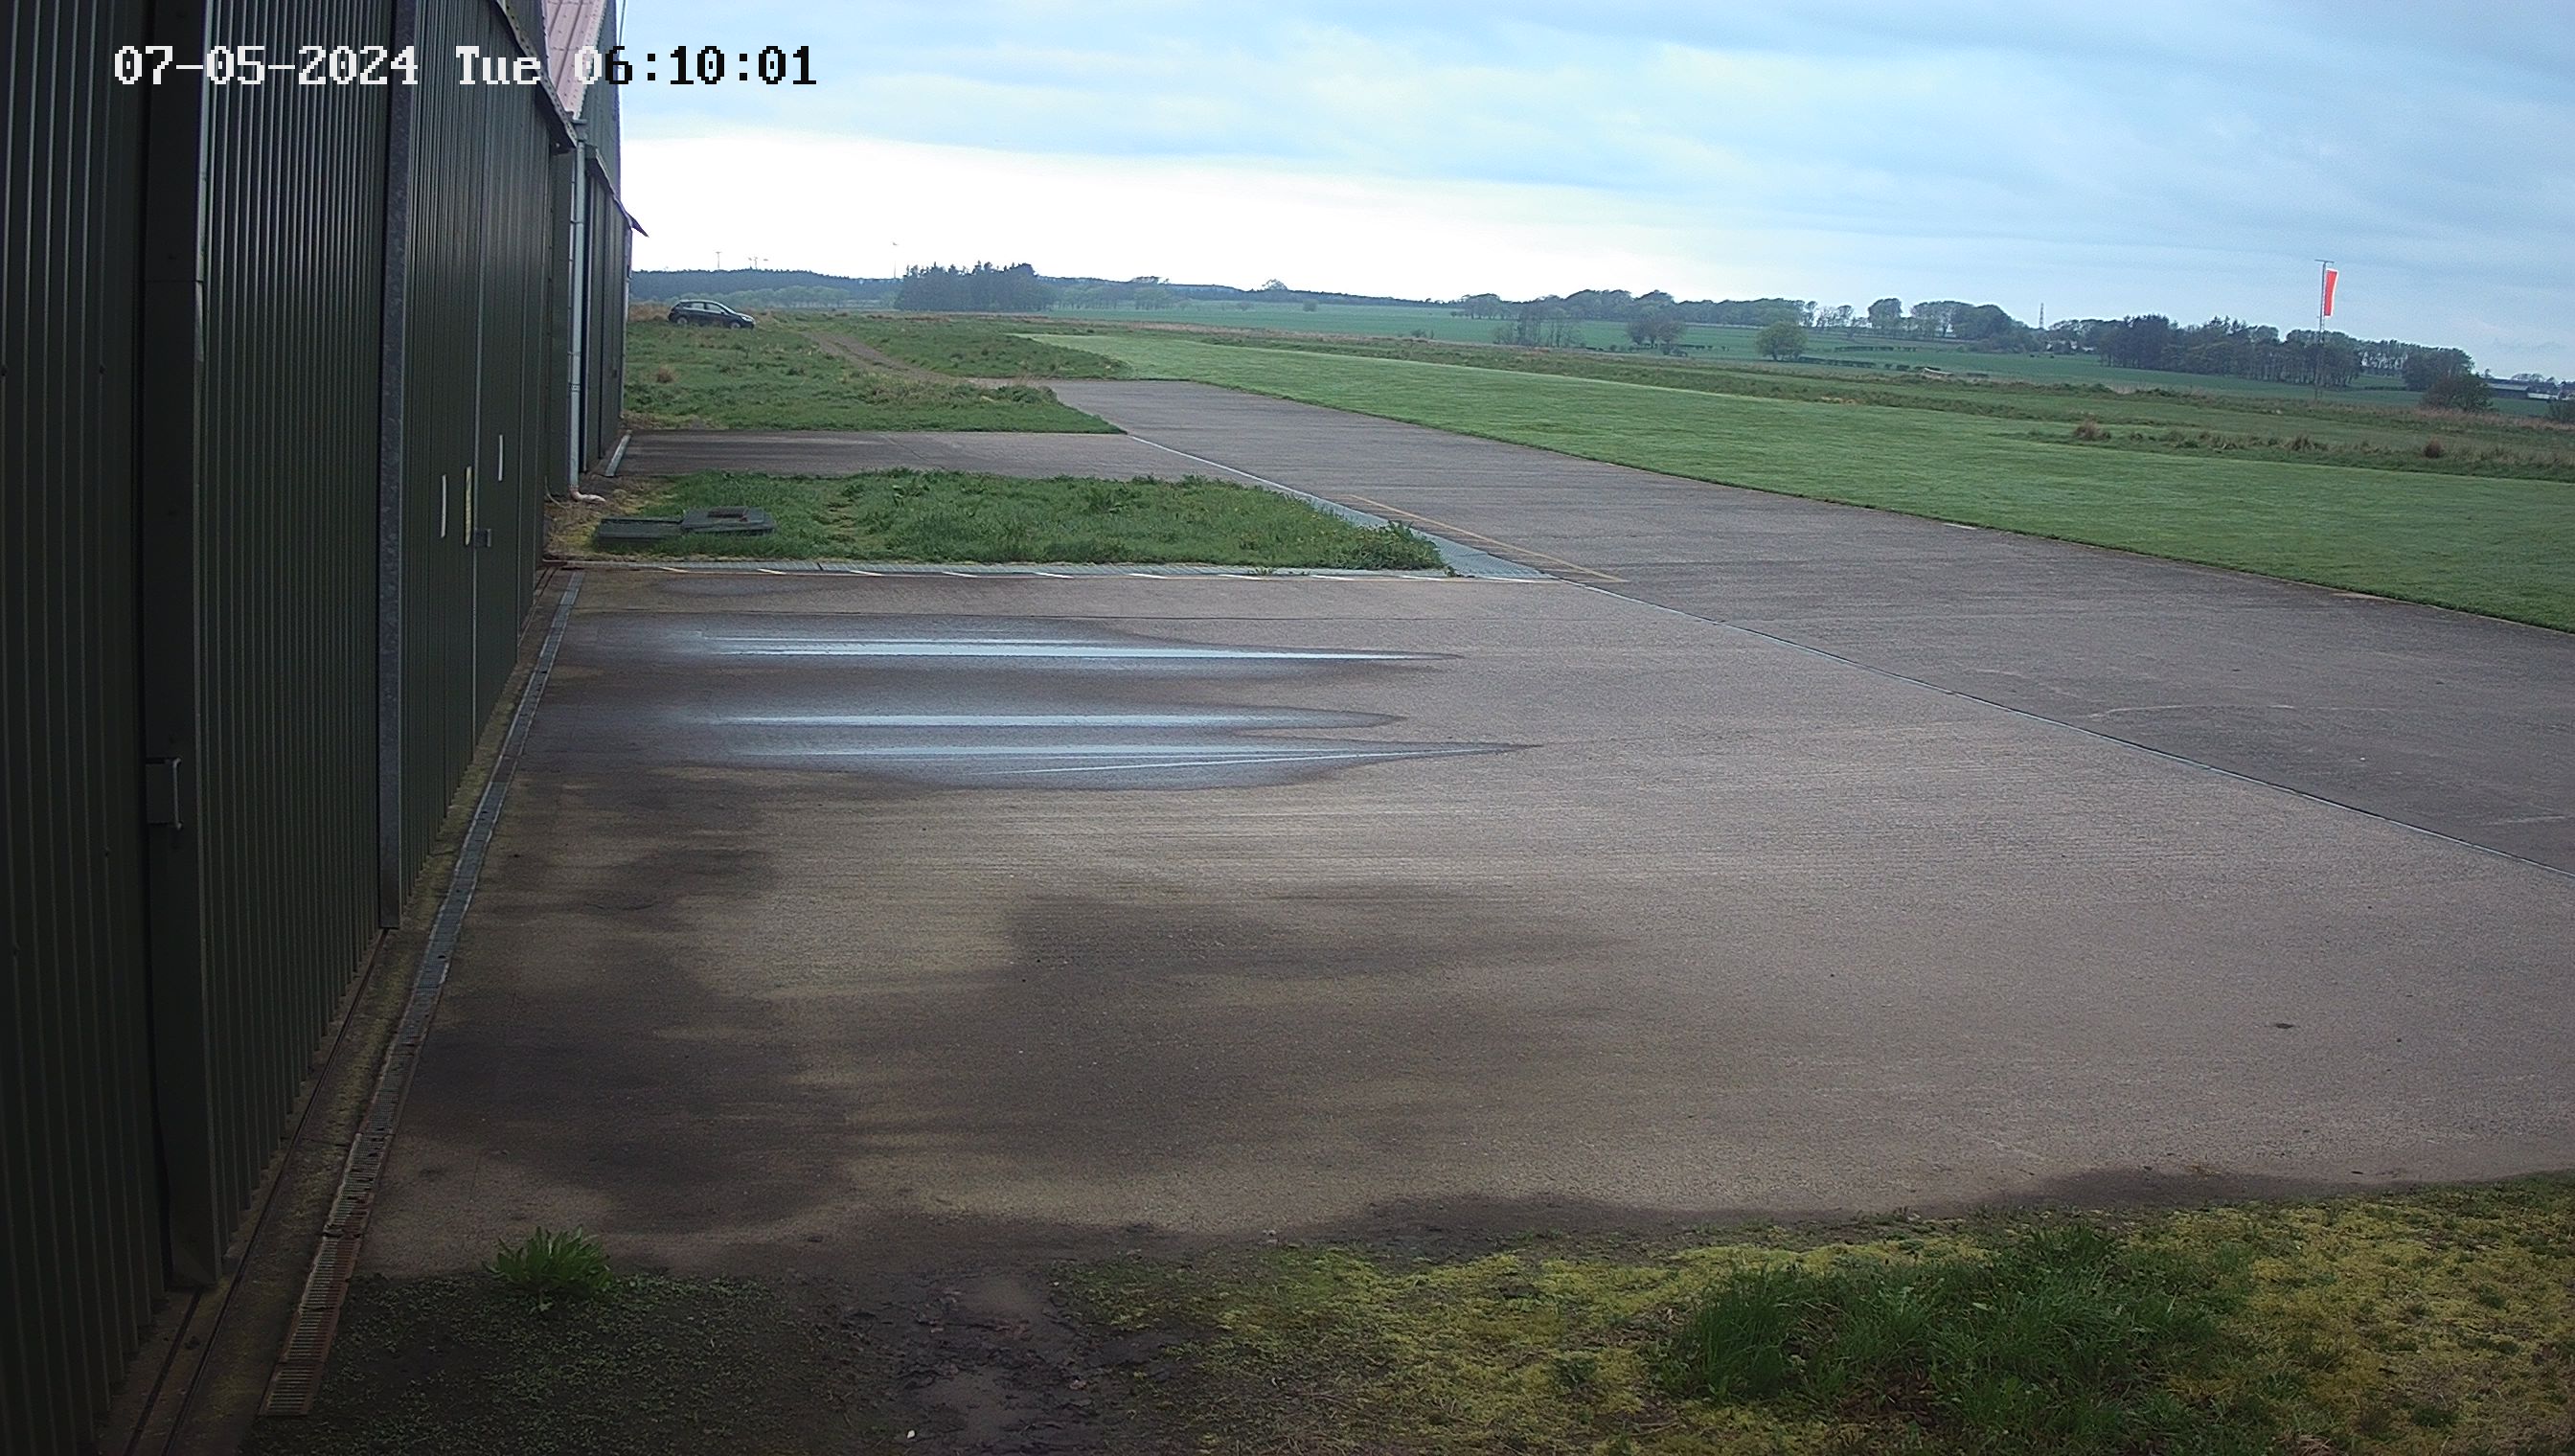 Latest snapshot of the Strathaven Airfield windsock